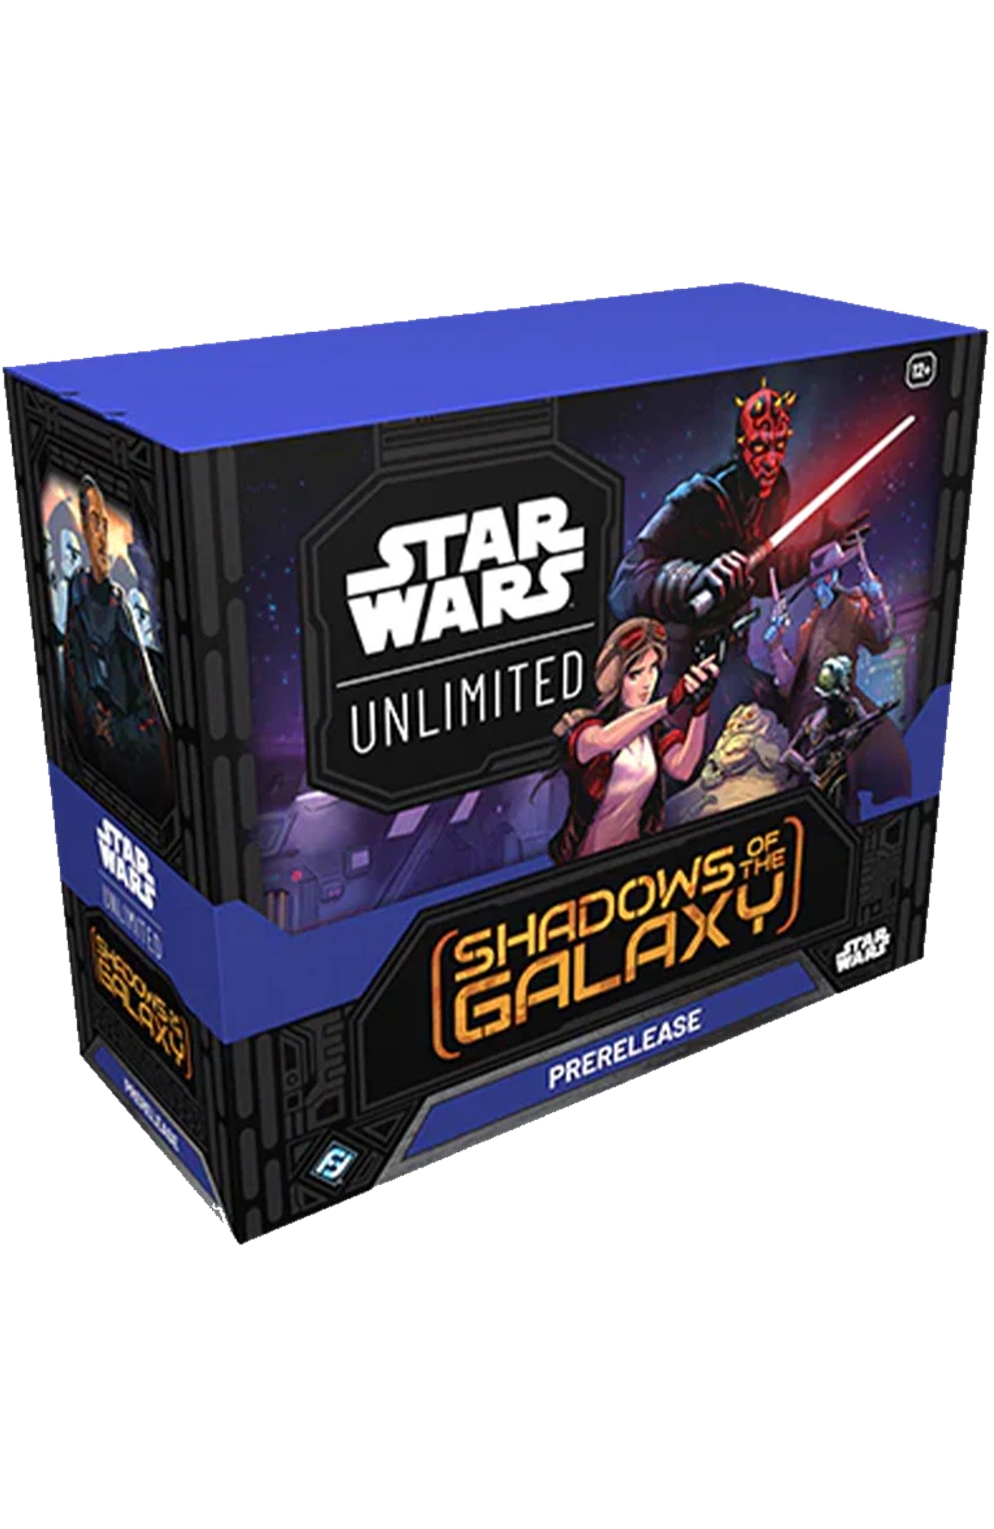 Star Wars Unlimited Tcg: Shadows of The Galaxy Prerelease Kit